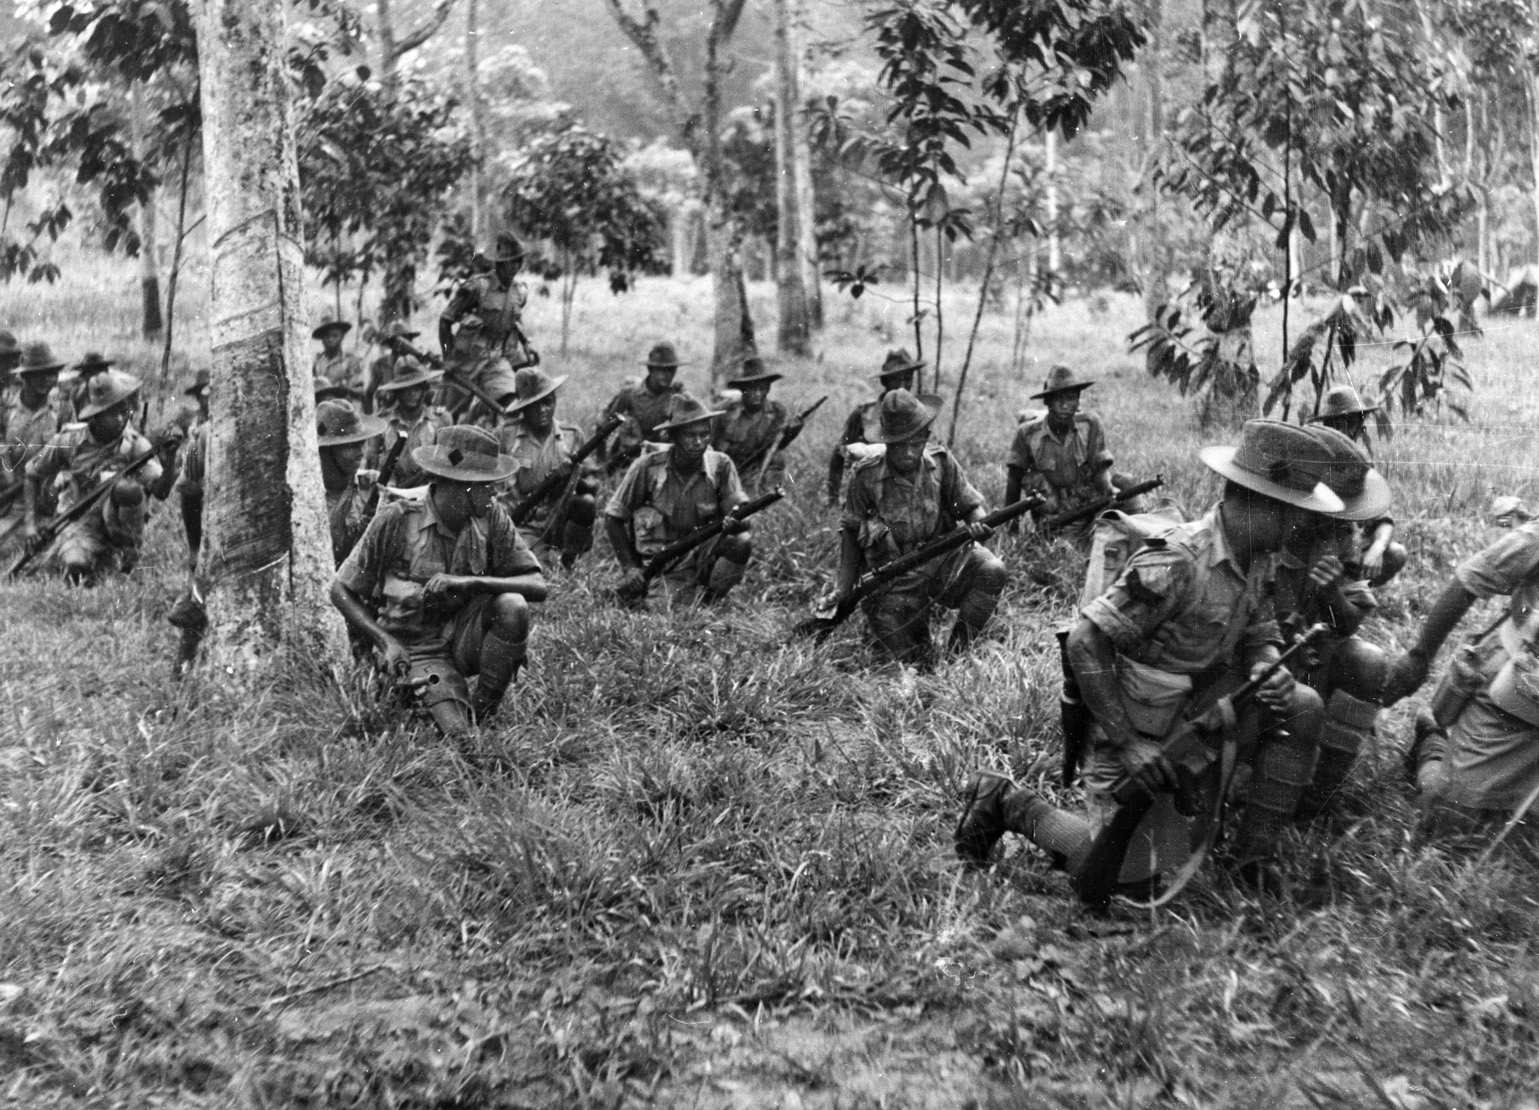 The 9th Gurkhas train in the jungle of the Malay Peninsula prior to the coming of war. The Gurkhas fought bravely and sustained heavy casualties in the futile defense against the Japanese advance on Singapore.